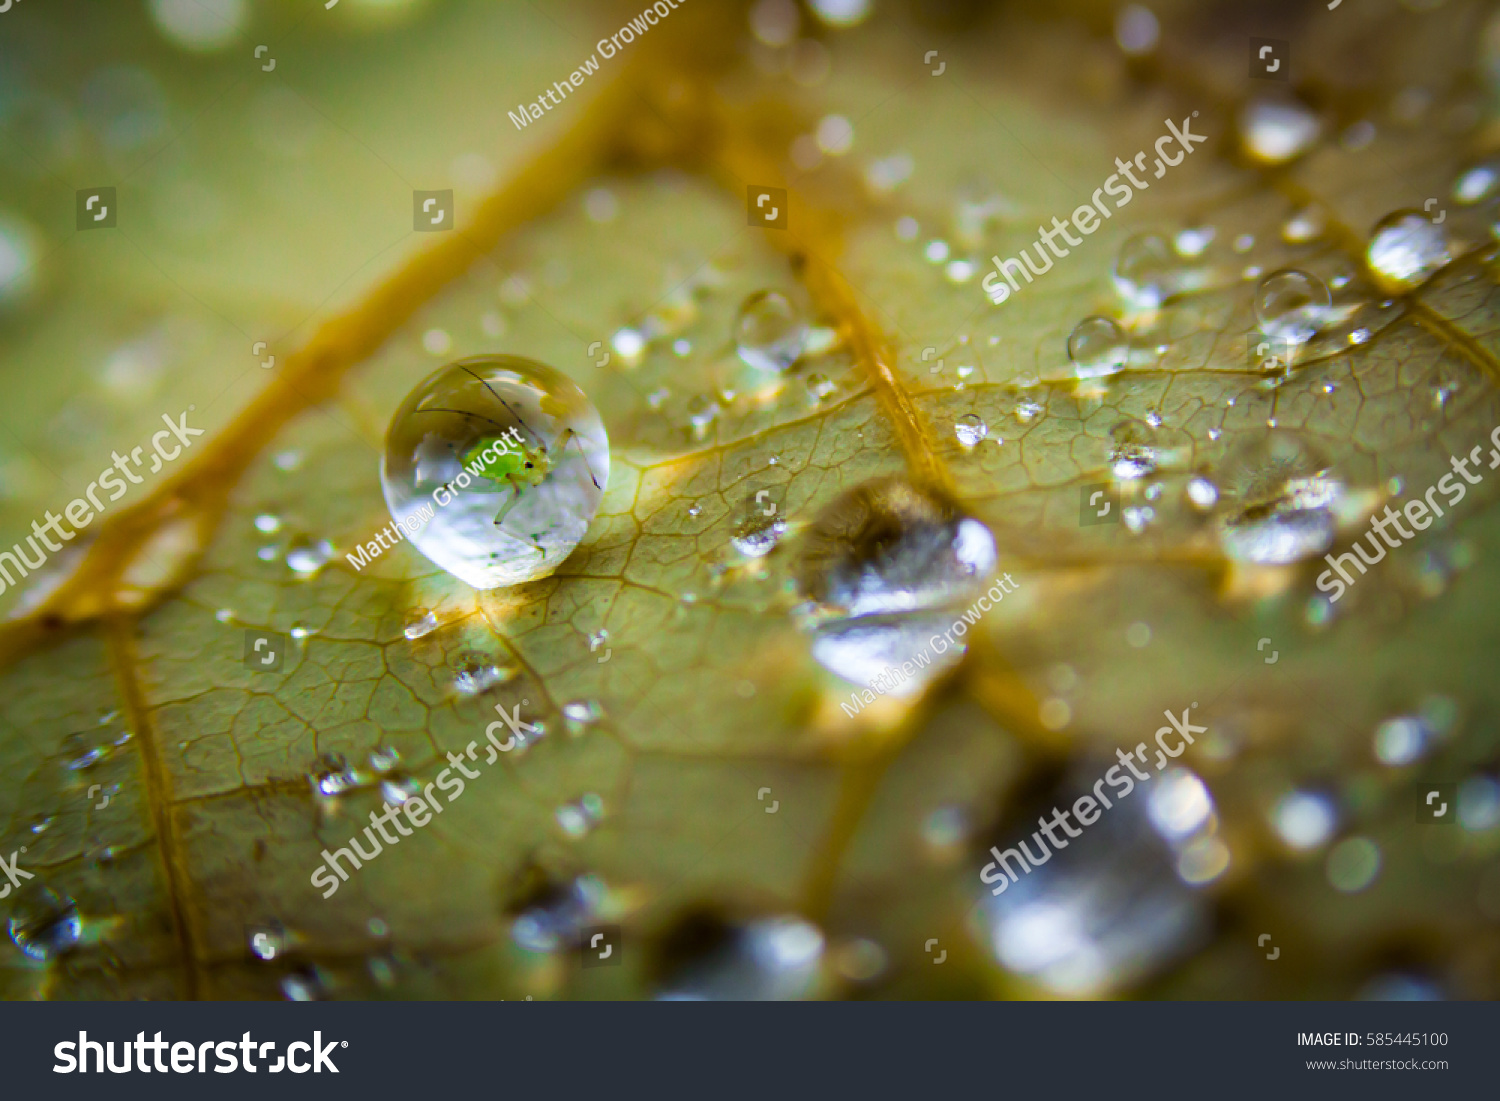 aphid stuck in a water droplet #585445100